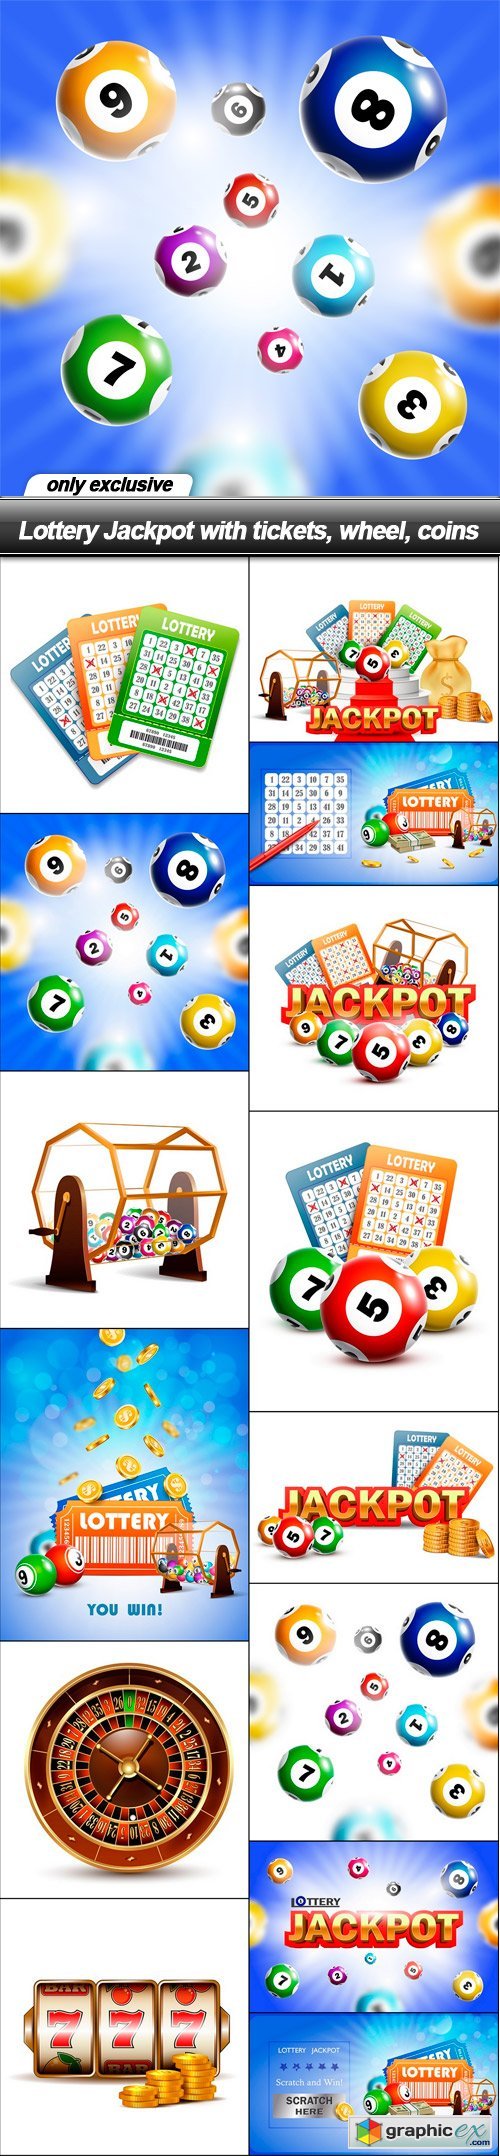 Lottery Jackpot with tickets, wheel, coins - 14 EPS